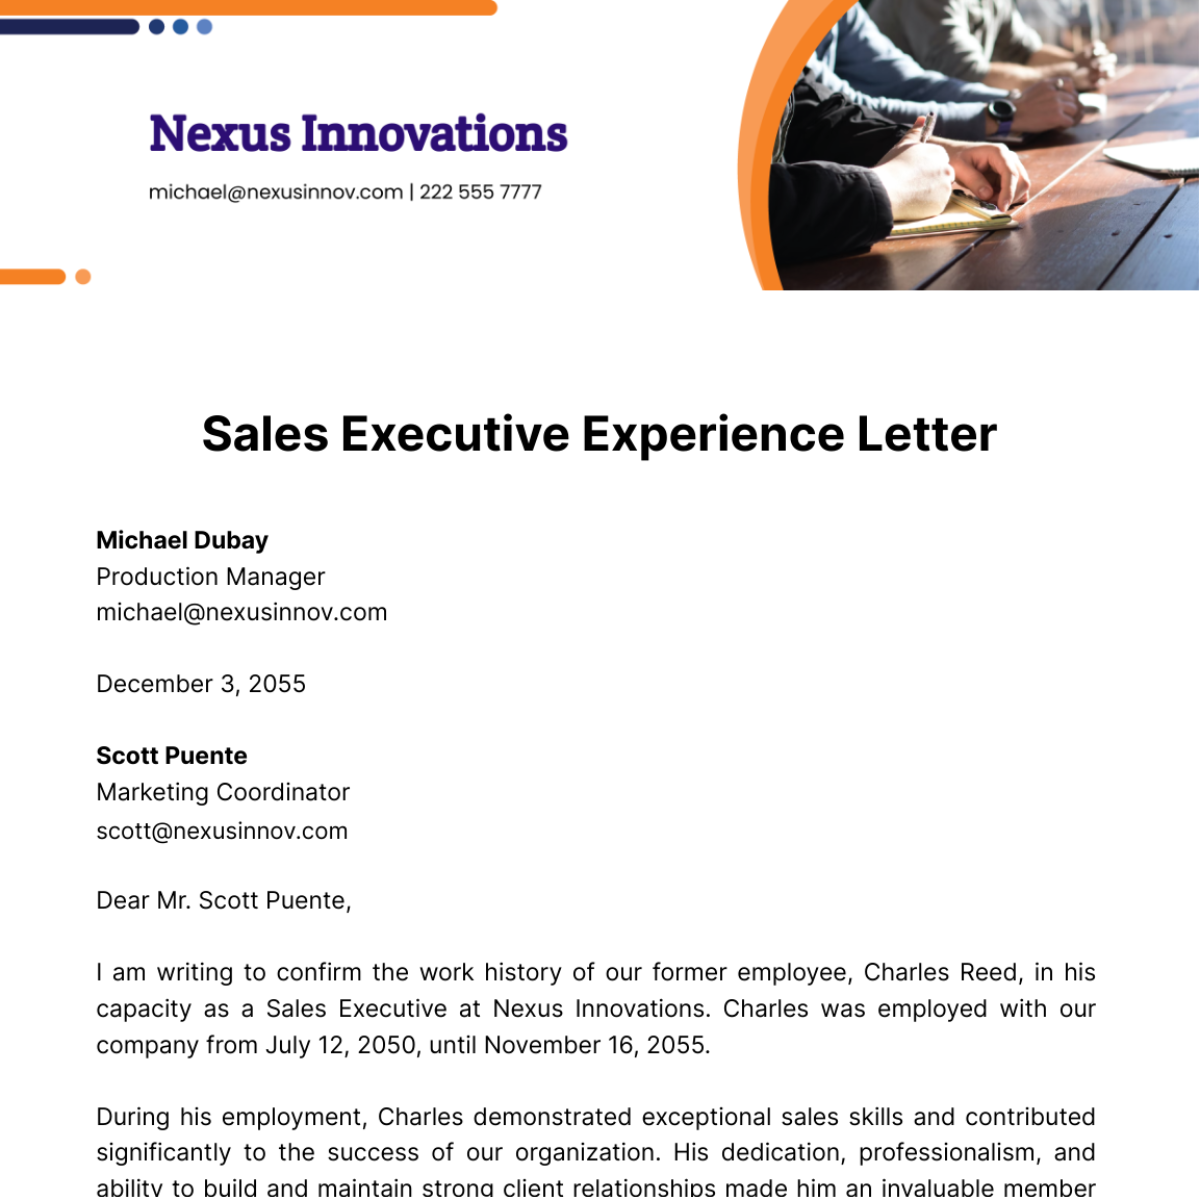 Sales Executive Experience Letter   Template